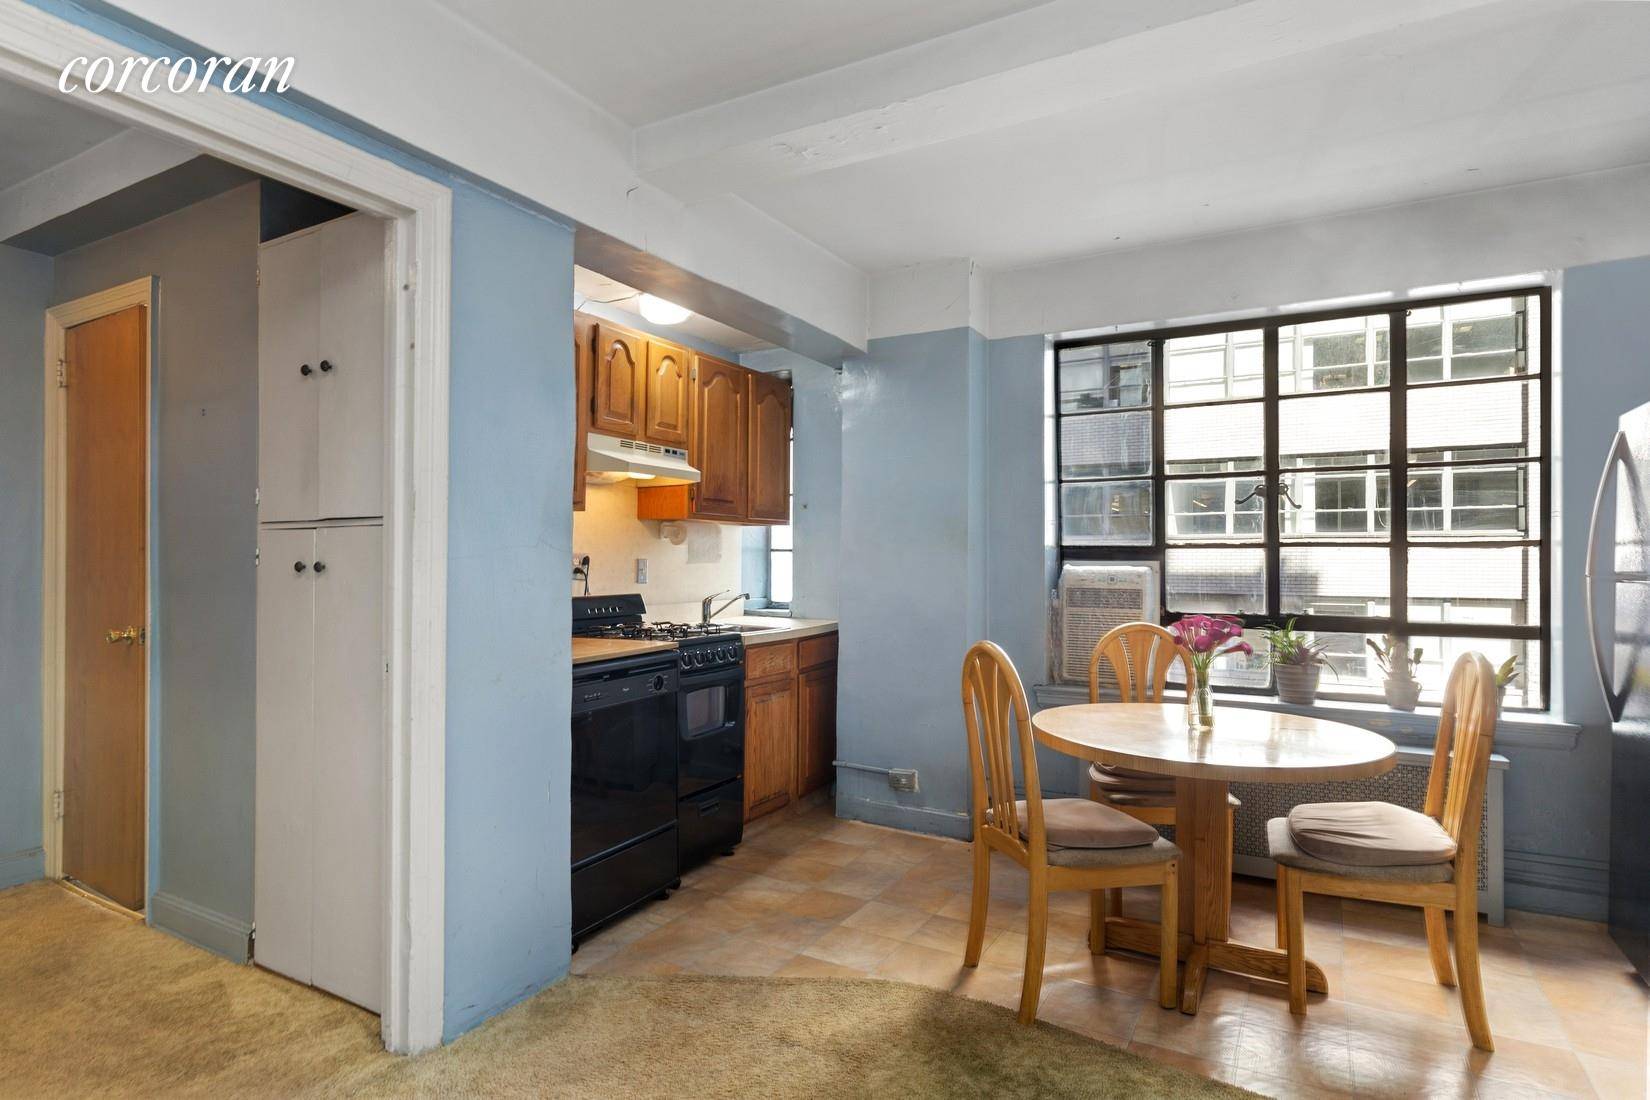 4C at 140 East 40th Street in Murray Hill has LOW, LOW MAINTENANCE !